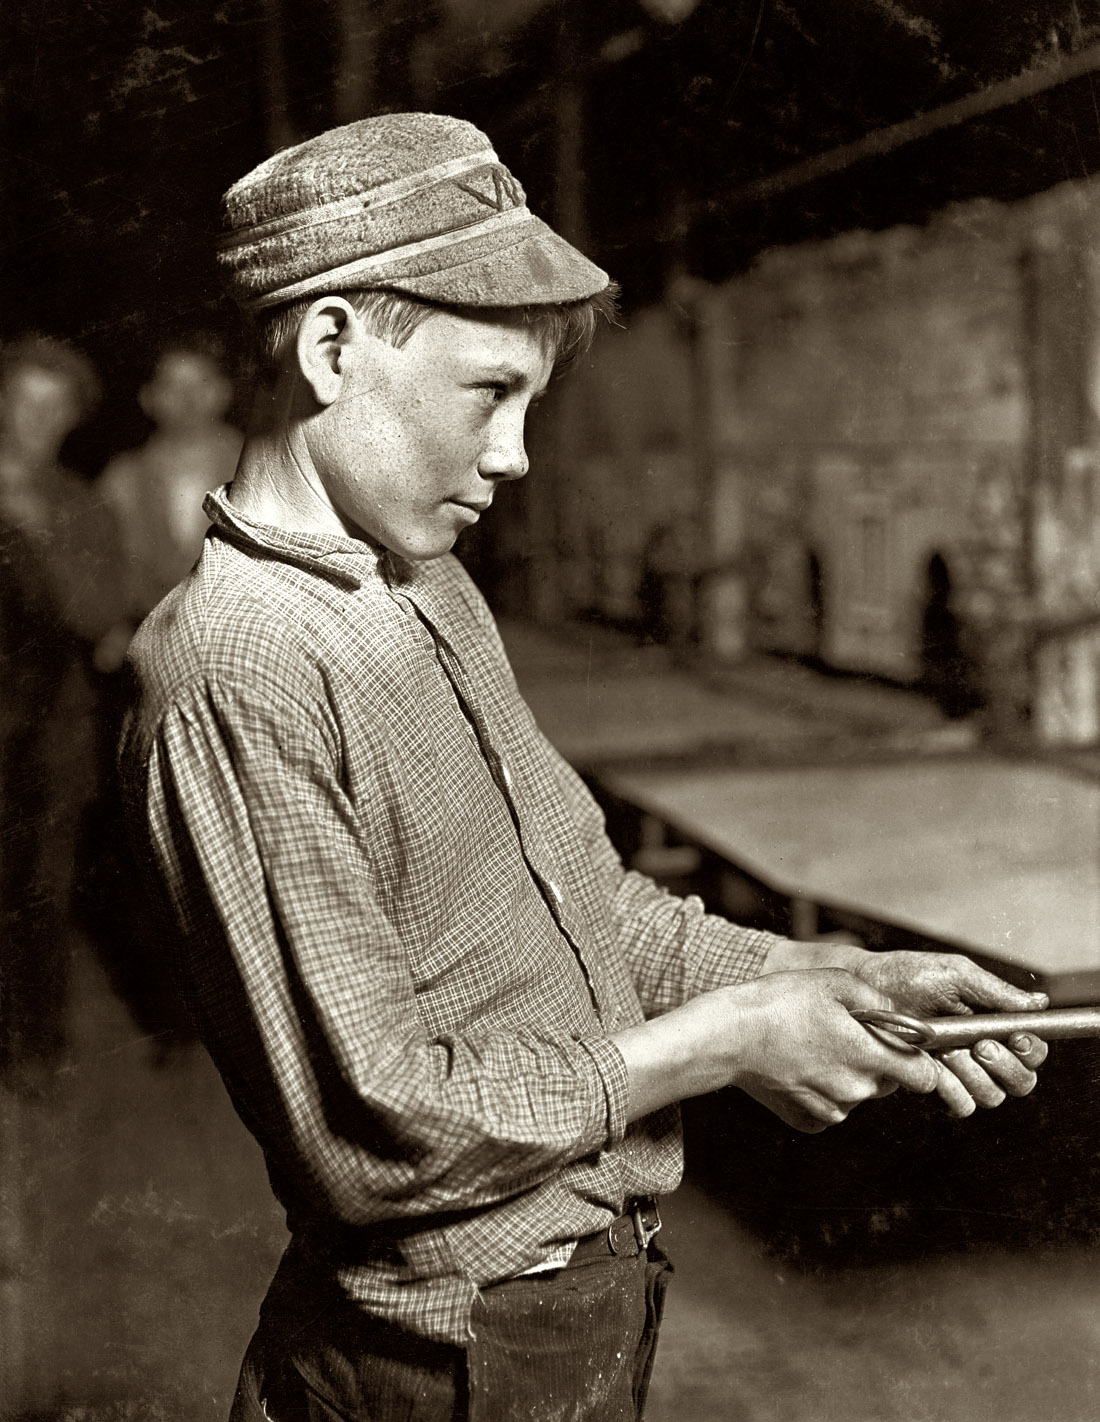 October 1908. Grafton, West Virginia. "Glassworks carrying-in boy at lehr (annealing furnace), fifteen years old. Has worked for several years. Works nine hours. Day shift one week, night shift next week. Gets $1.25 per day." Photograph and caption by Lewis Wickes Hine. View full size. 